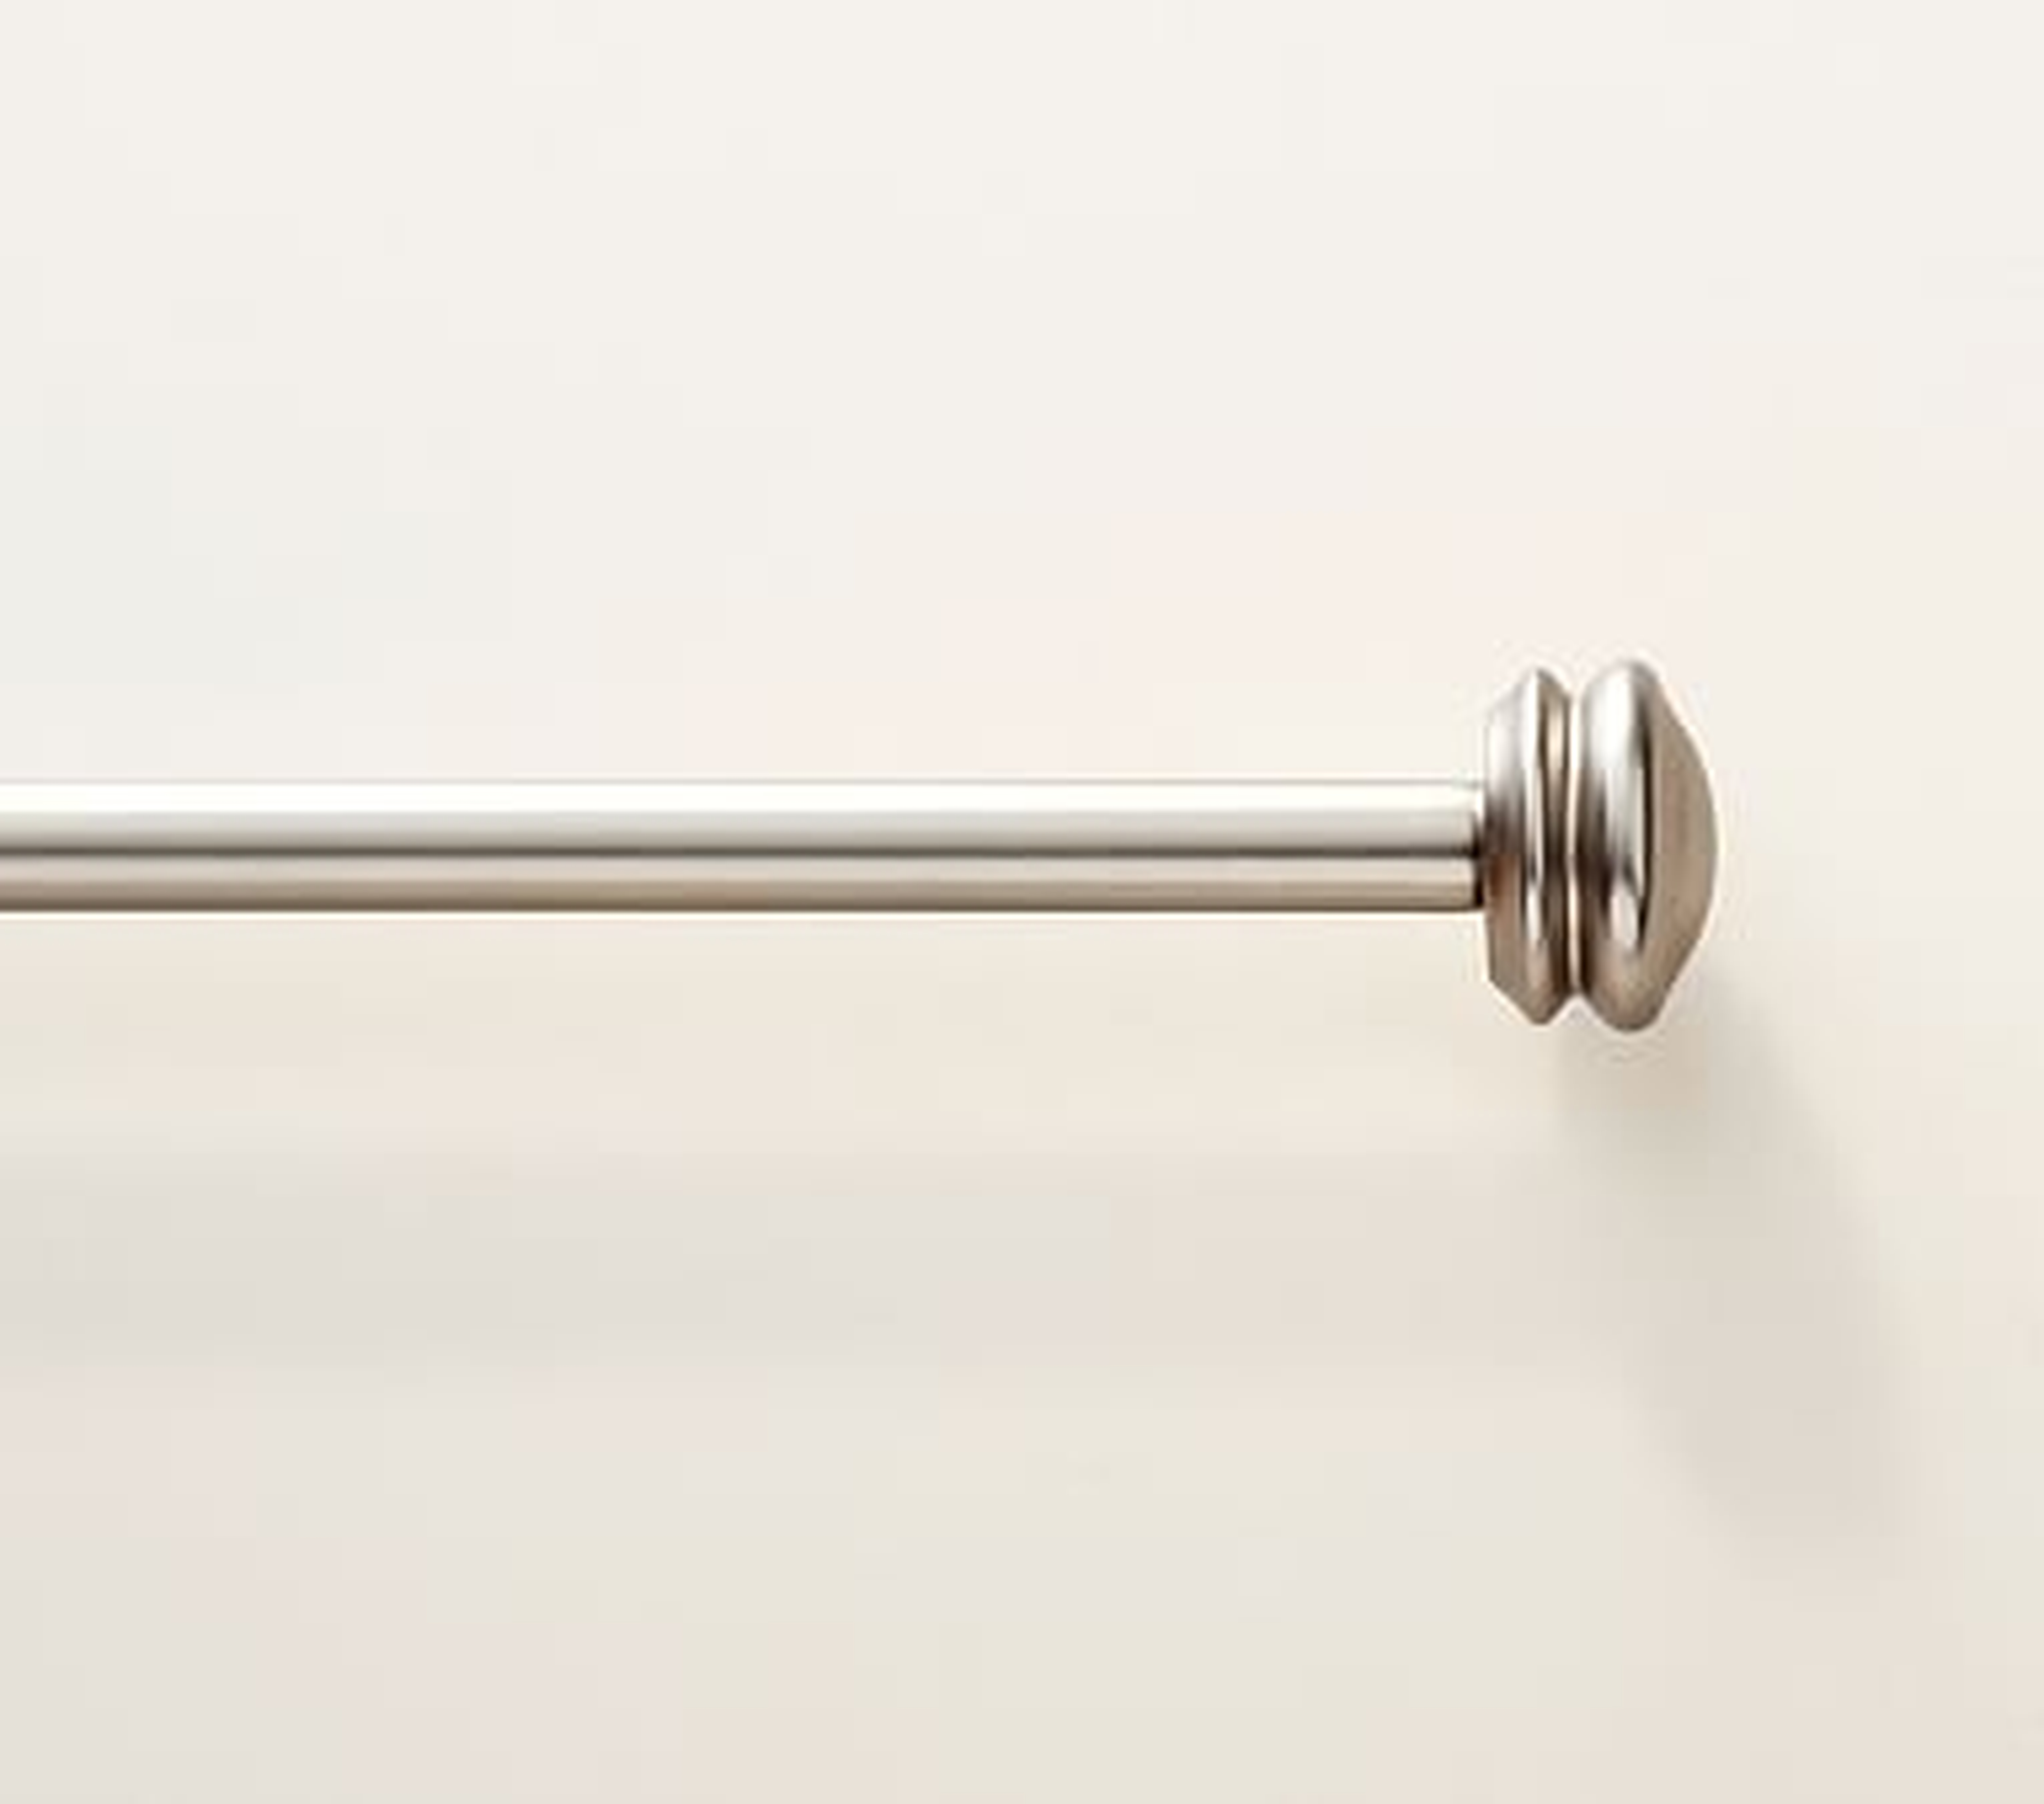 Metal Rod, 60-108 Inches, Nickel - Pottery Barn Kids